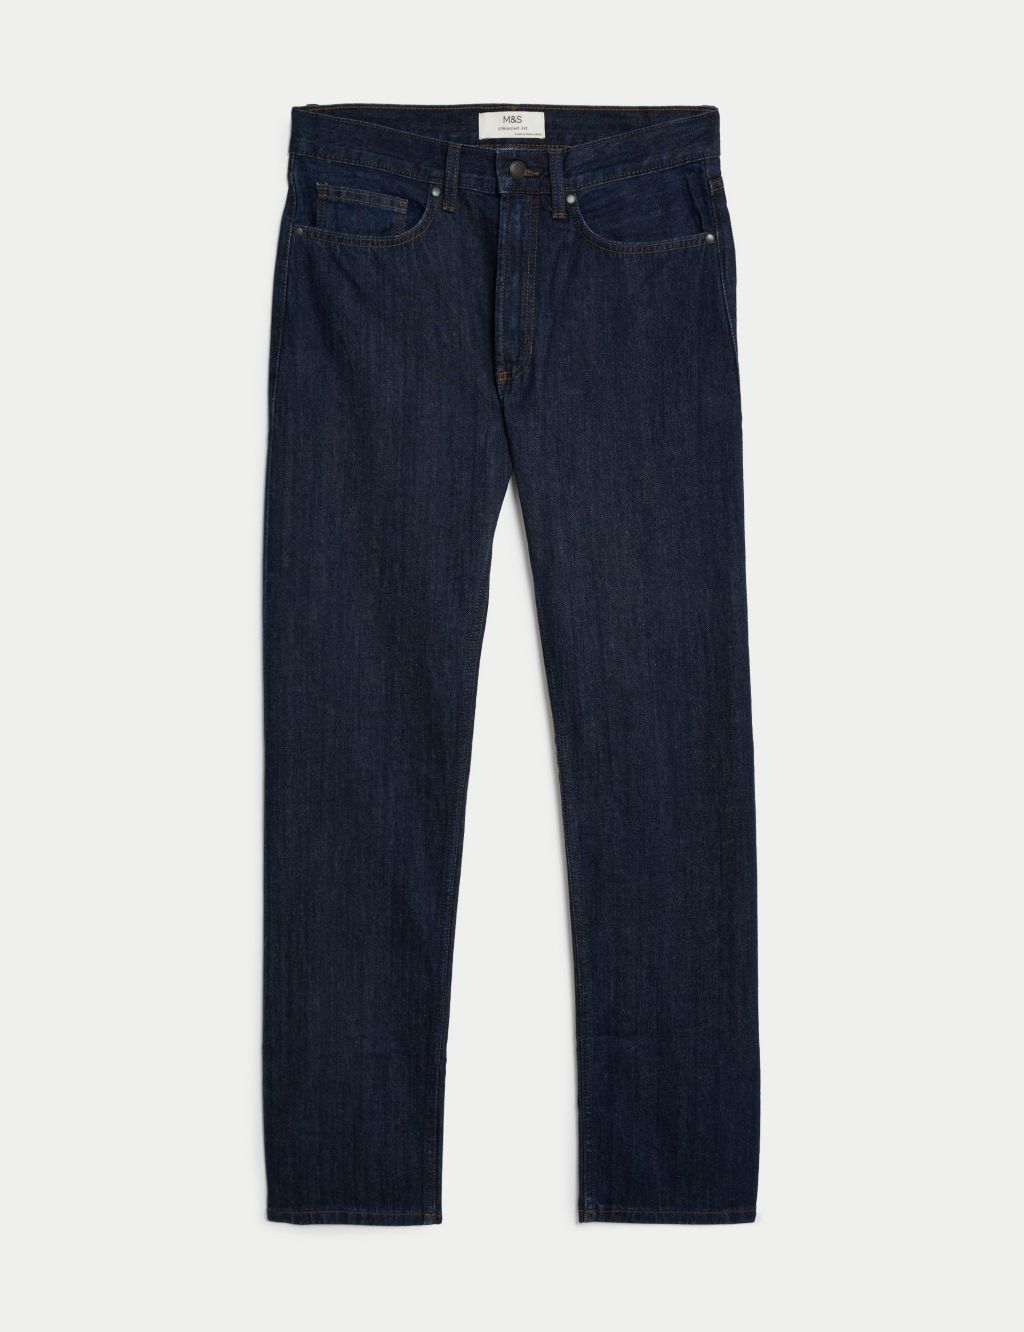 Straight Fit Pure Cotton Jeans image 1